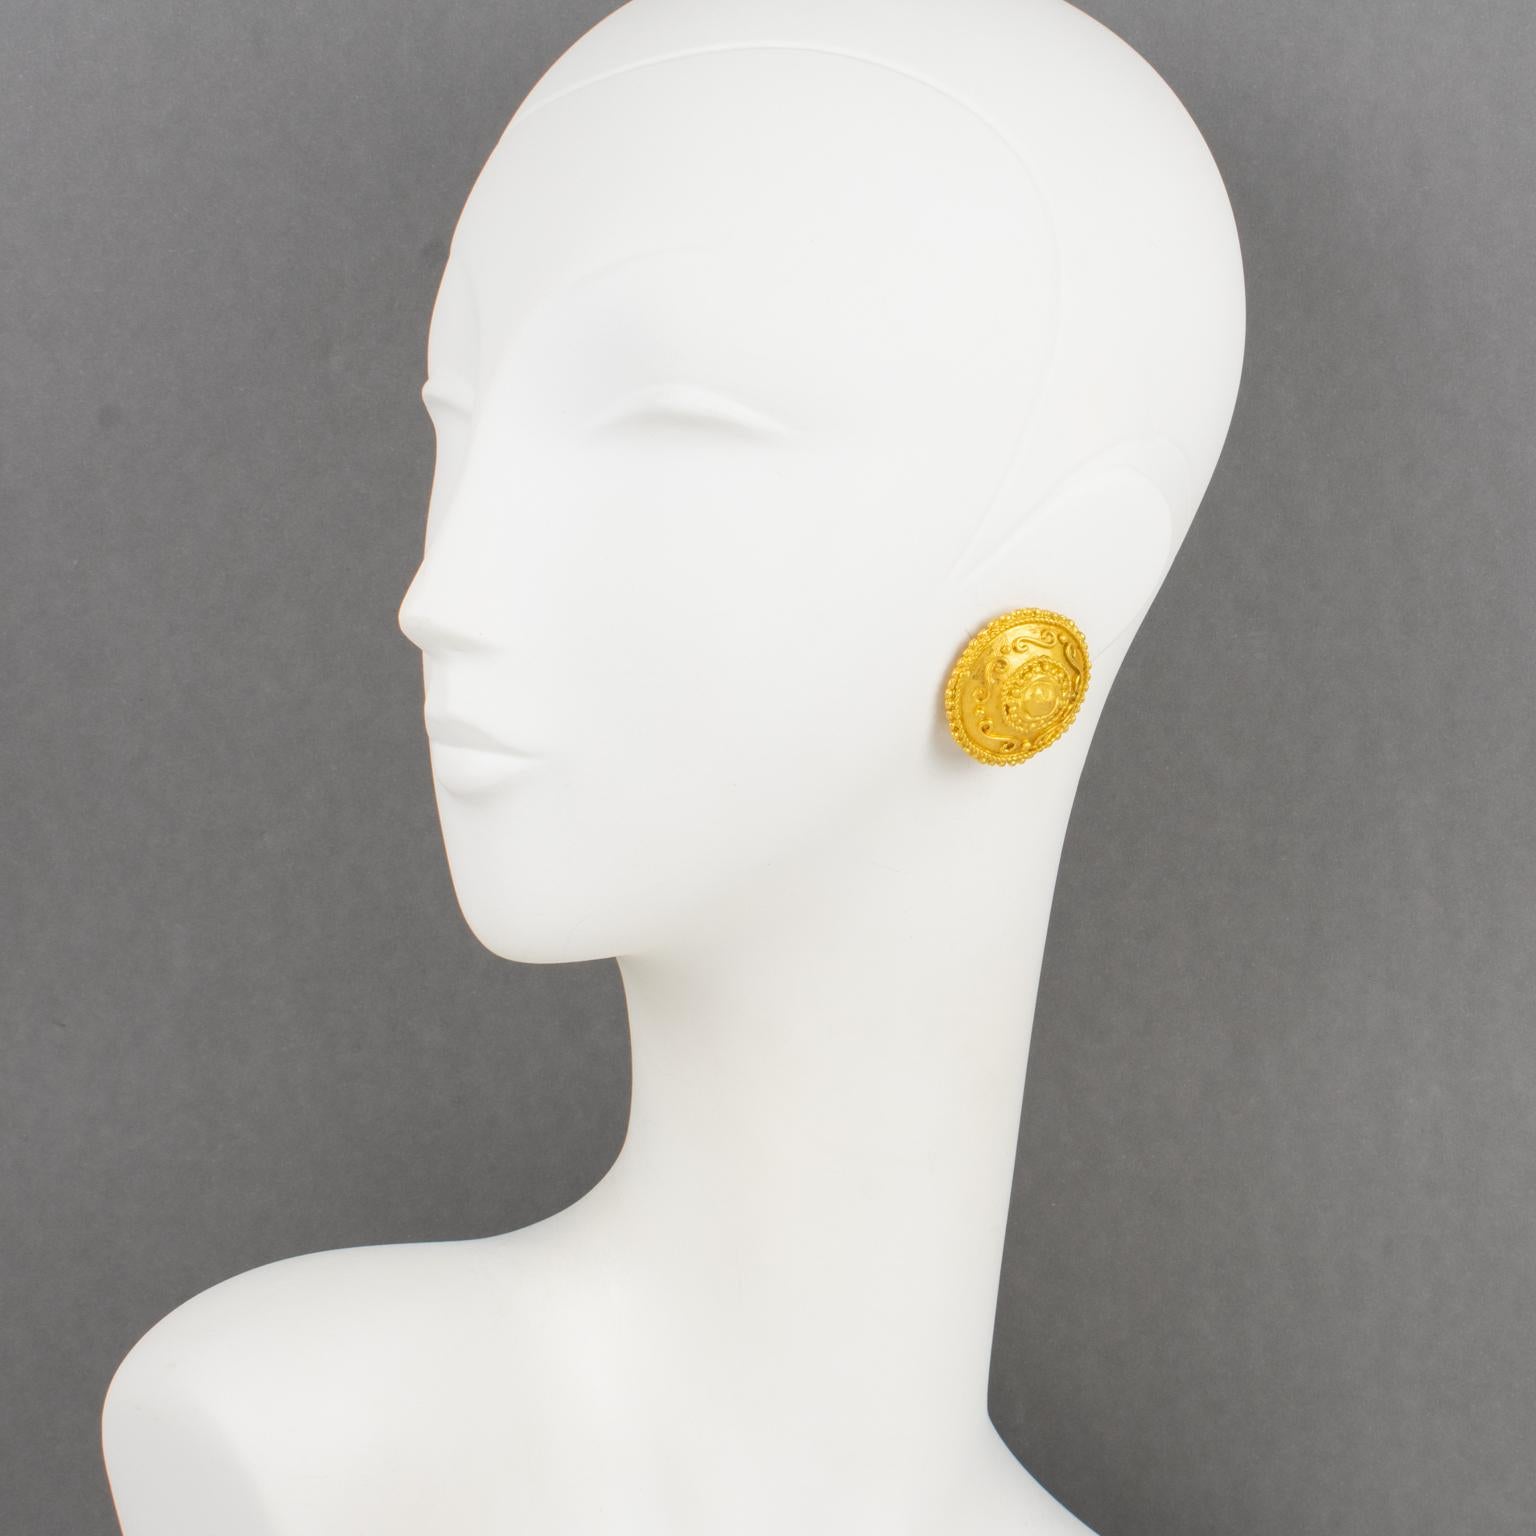 These stylish Emanuel Ungaro Paris couture clip-on earrings feature a gilt metal domed rounded shape with a geometric carved pattern and satin finish texture. Each piece is signed with a tag underside reading Ungaro - Paris - Made in France.
The